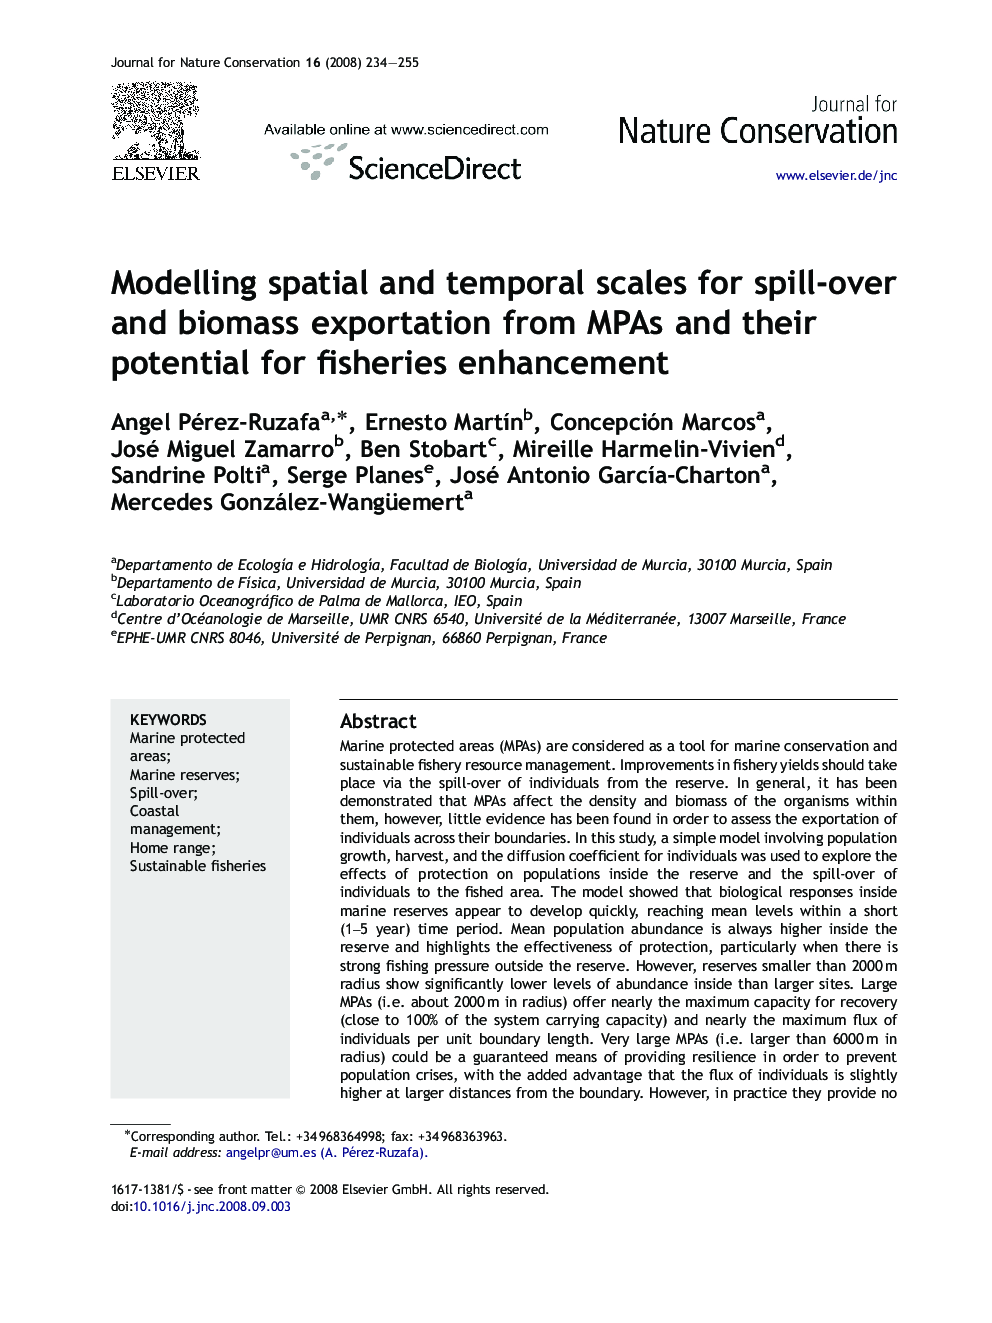 Modelling spatial and temporal scales for spill-over and biomass exportation from MPAs and their potential for fisheries enhancement